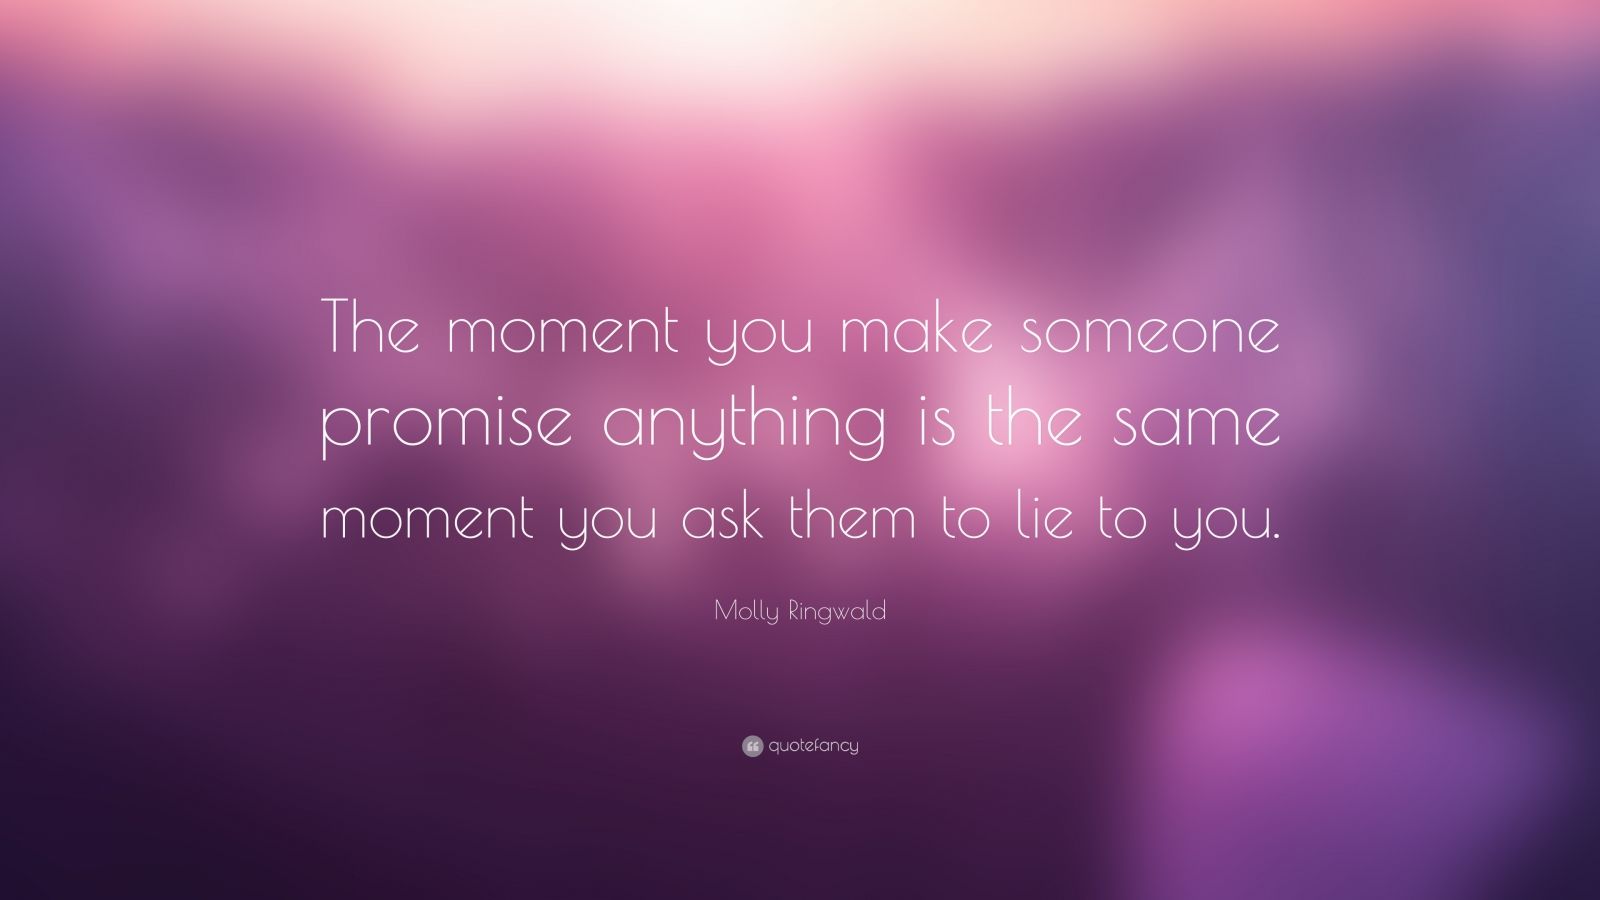 Molly Ringwald Quote: “The moment you make someone promise anything is ...